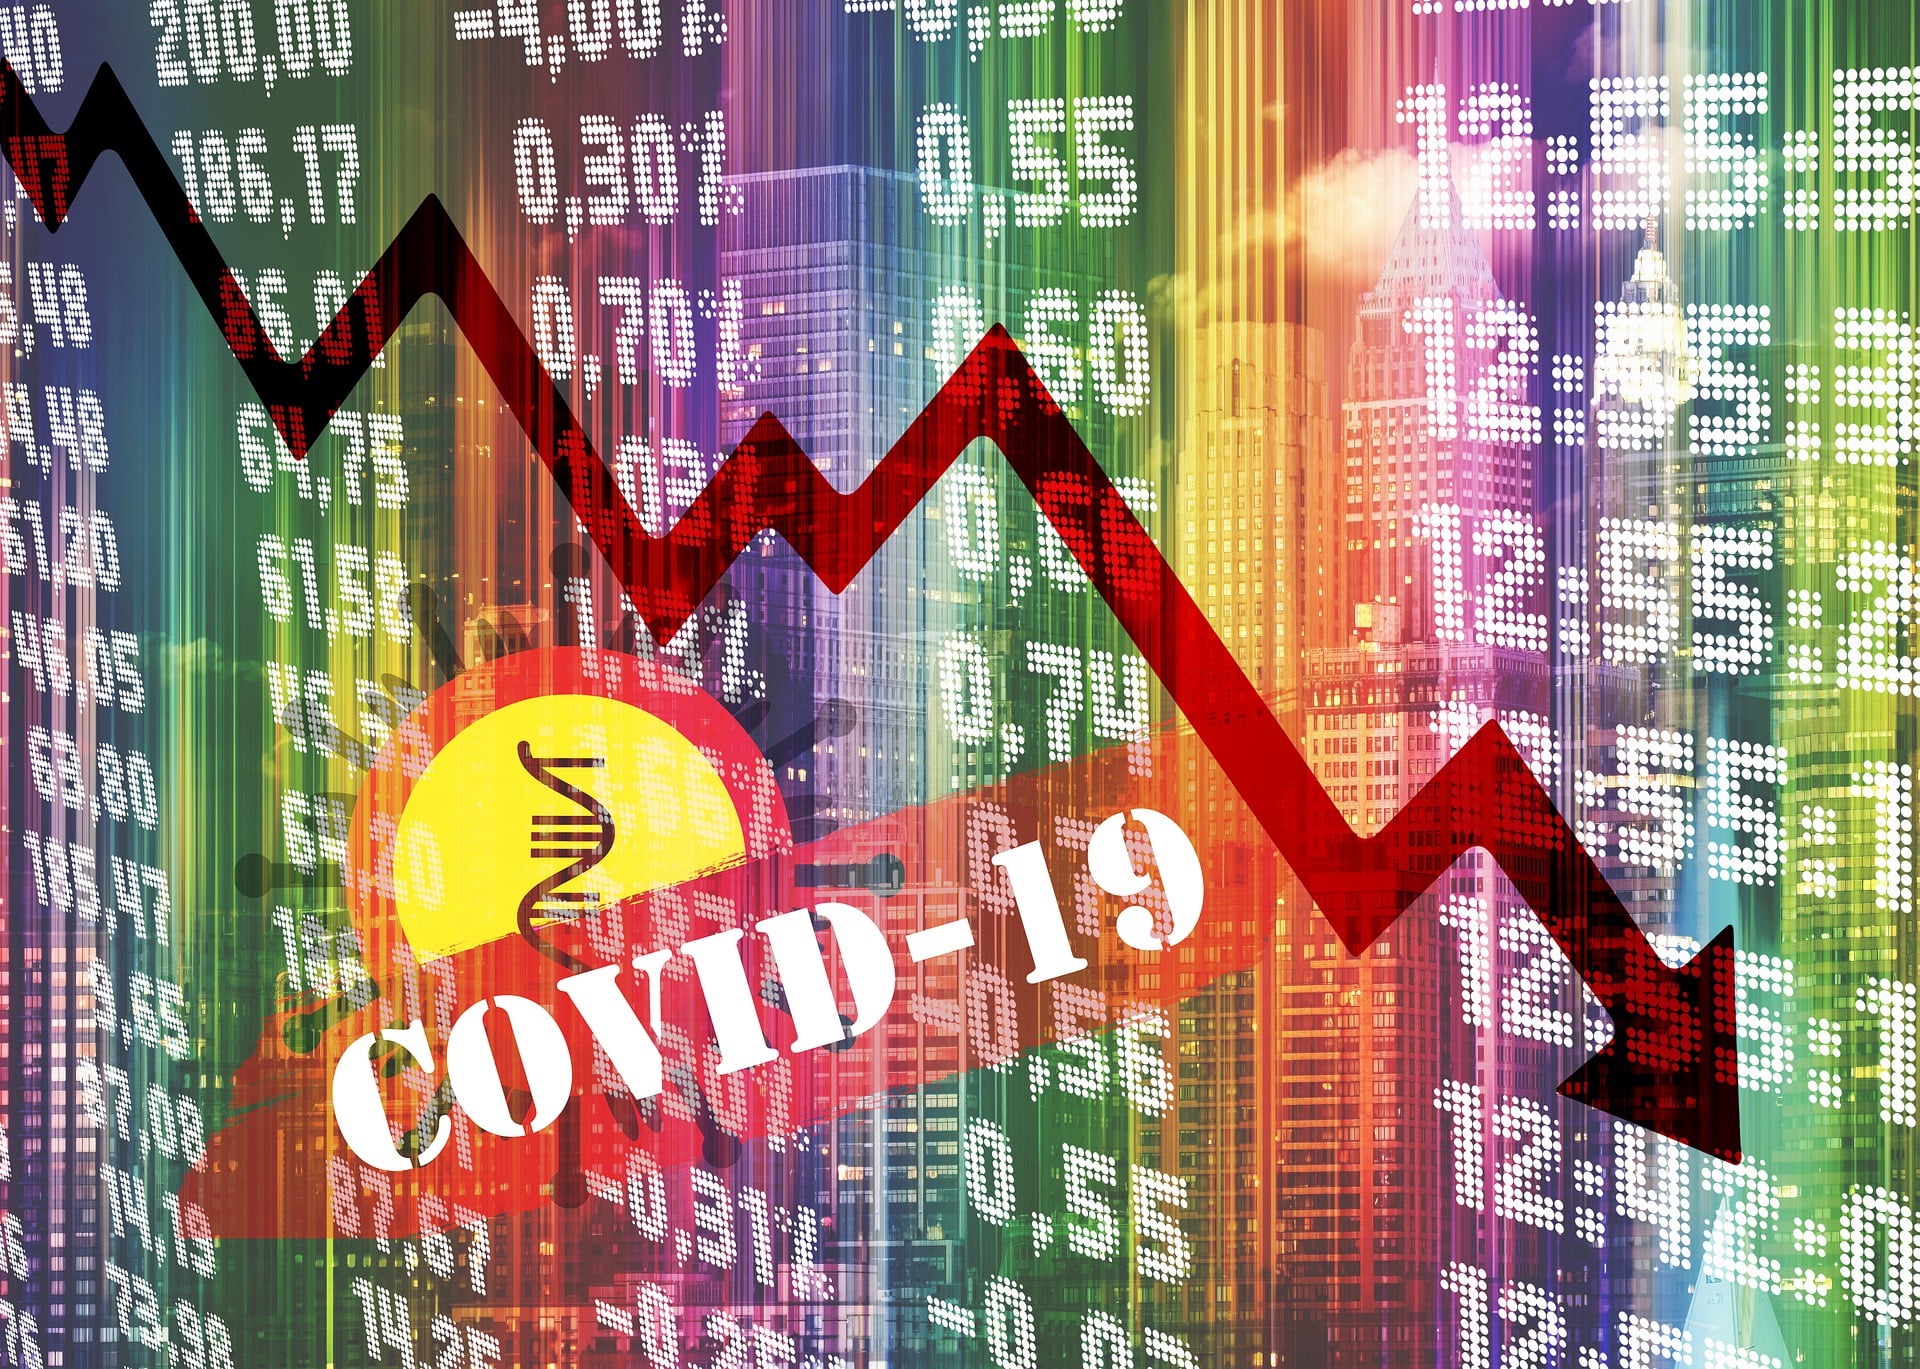 How to change your business to survive Covid-19